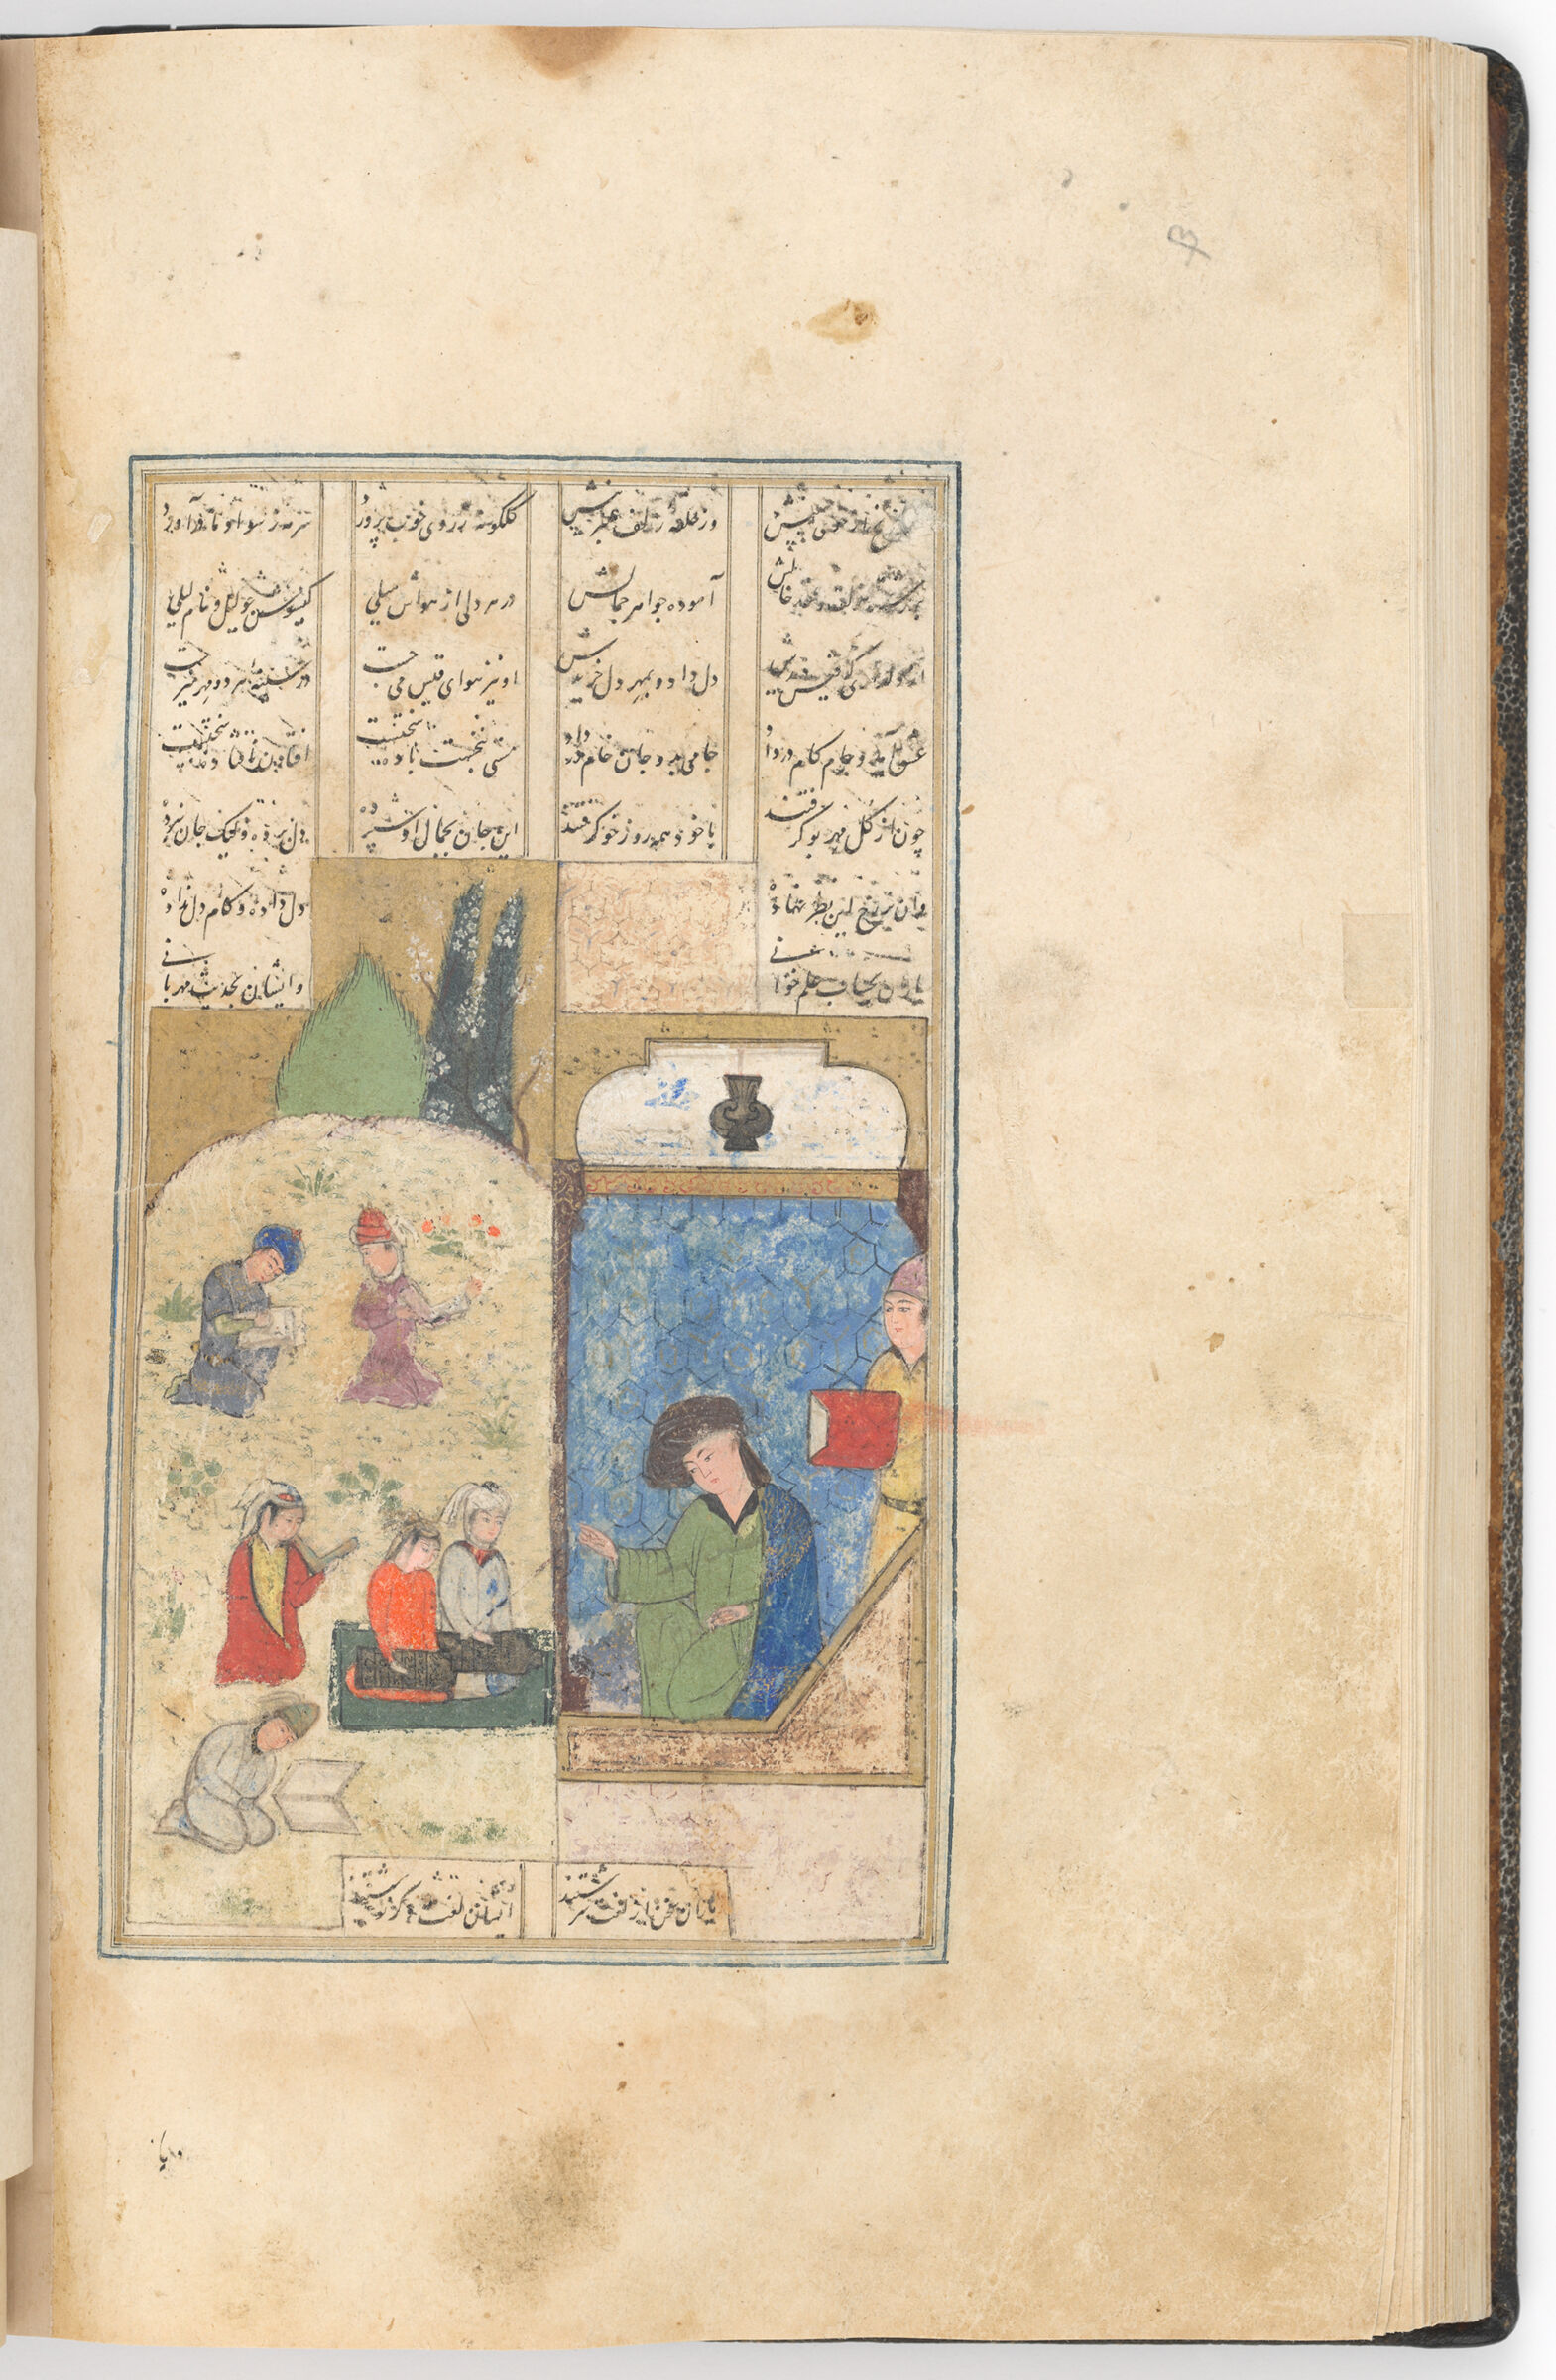 Layla And Majnun At School (Text Recto; Painting Verso Of Folio 129), Painting From A Manuscript Of The Khamsa By Nizami